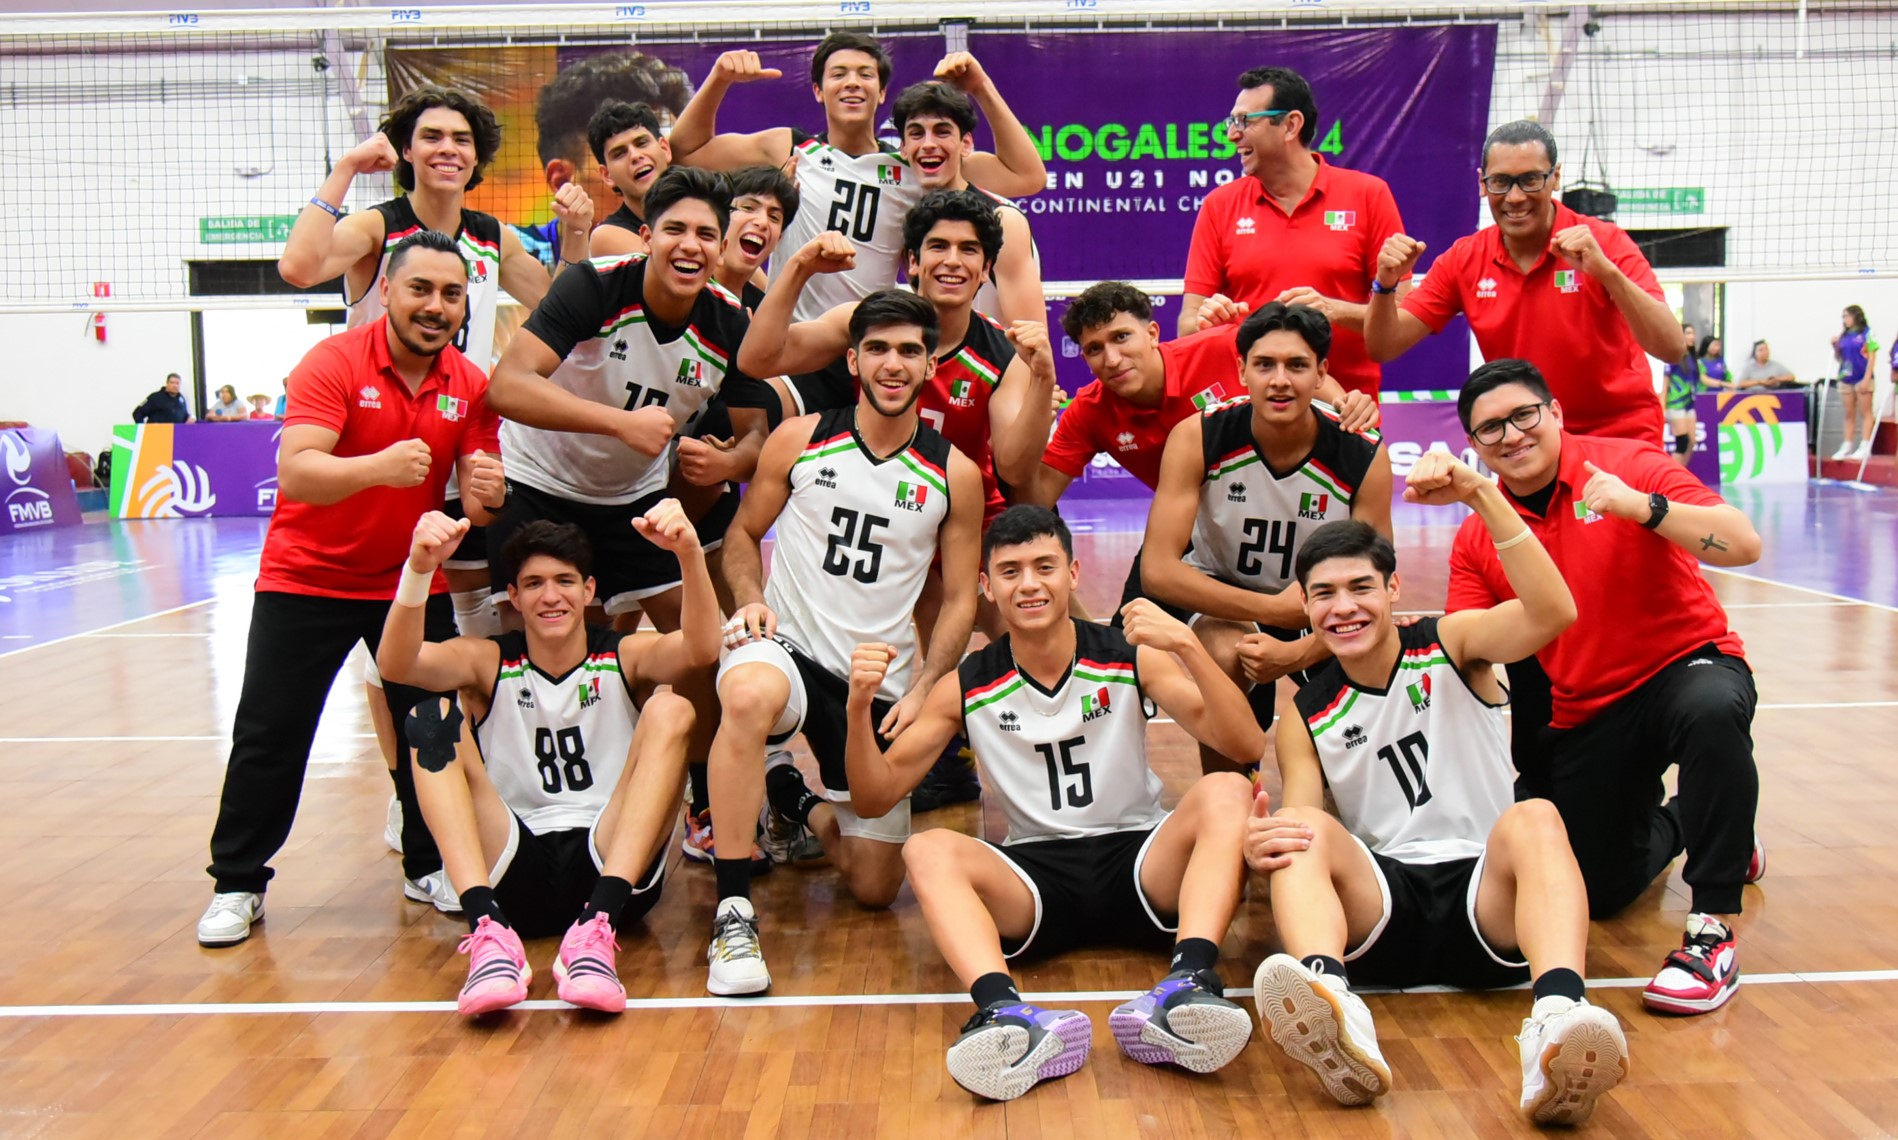 Mexico to Play for Fifth Place in NORCECA U21